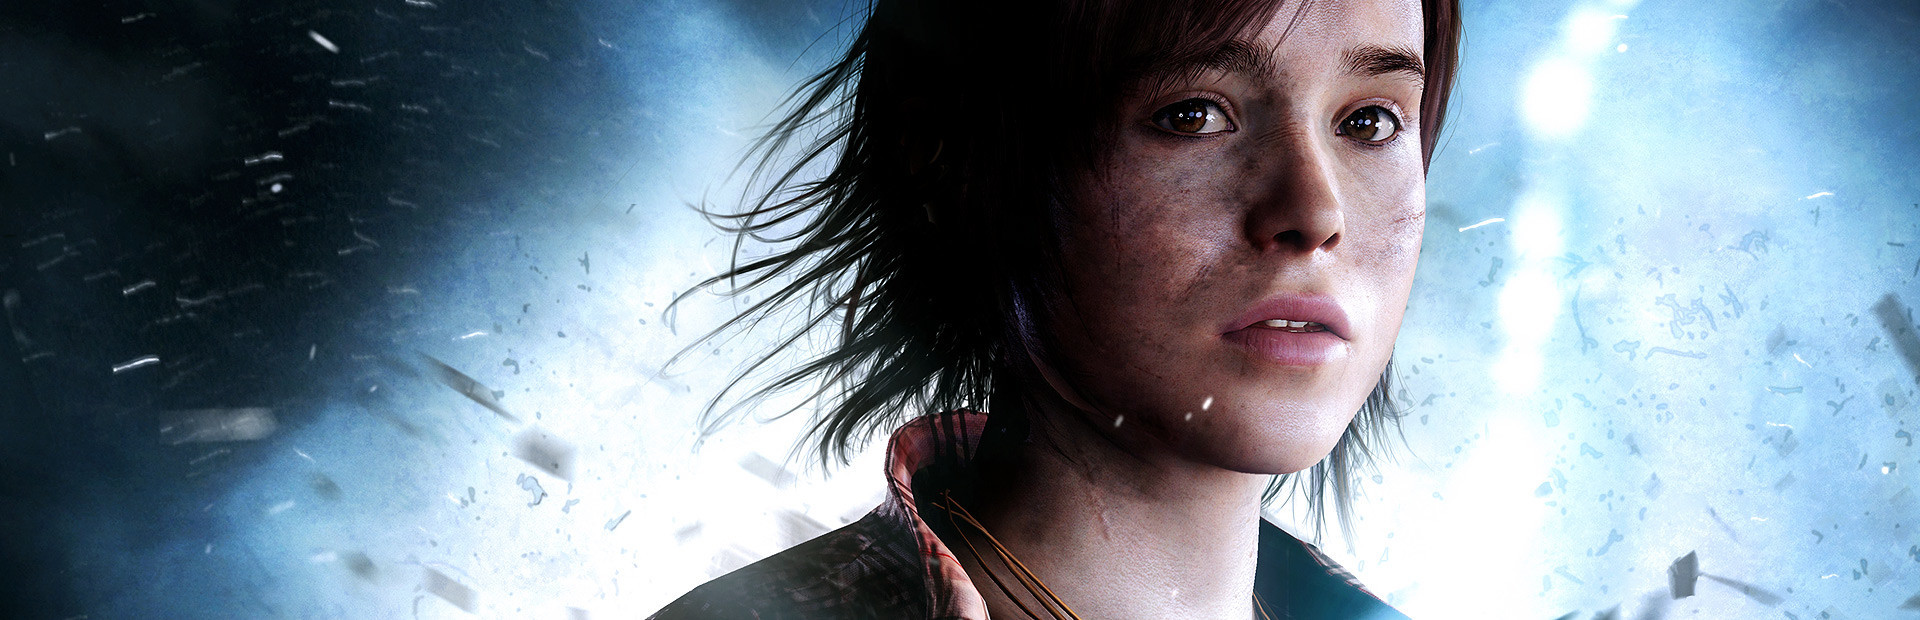 Beyond: Two Souls cover image